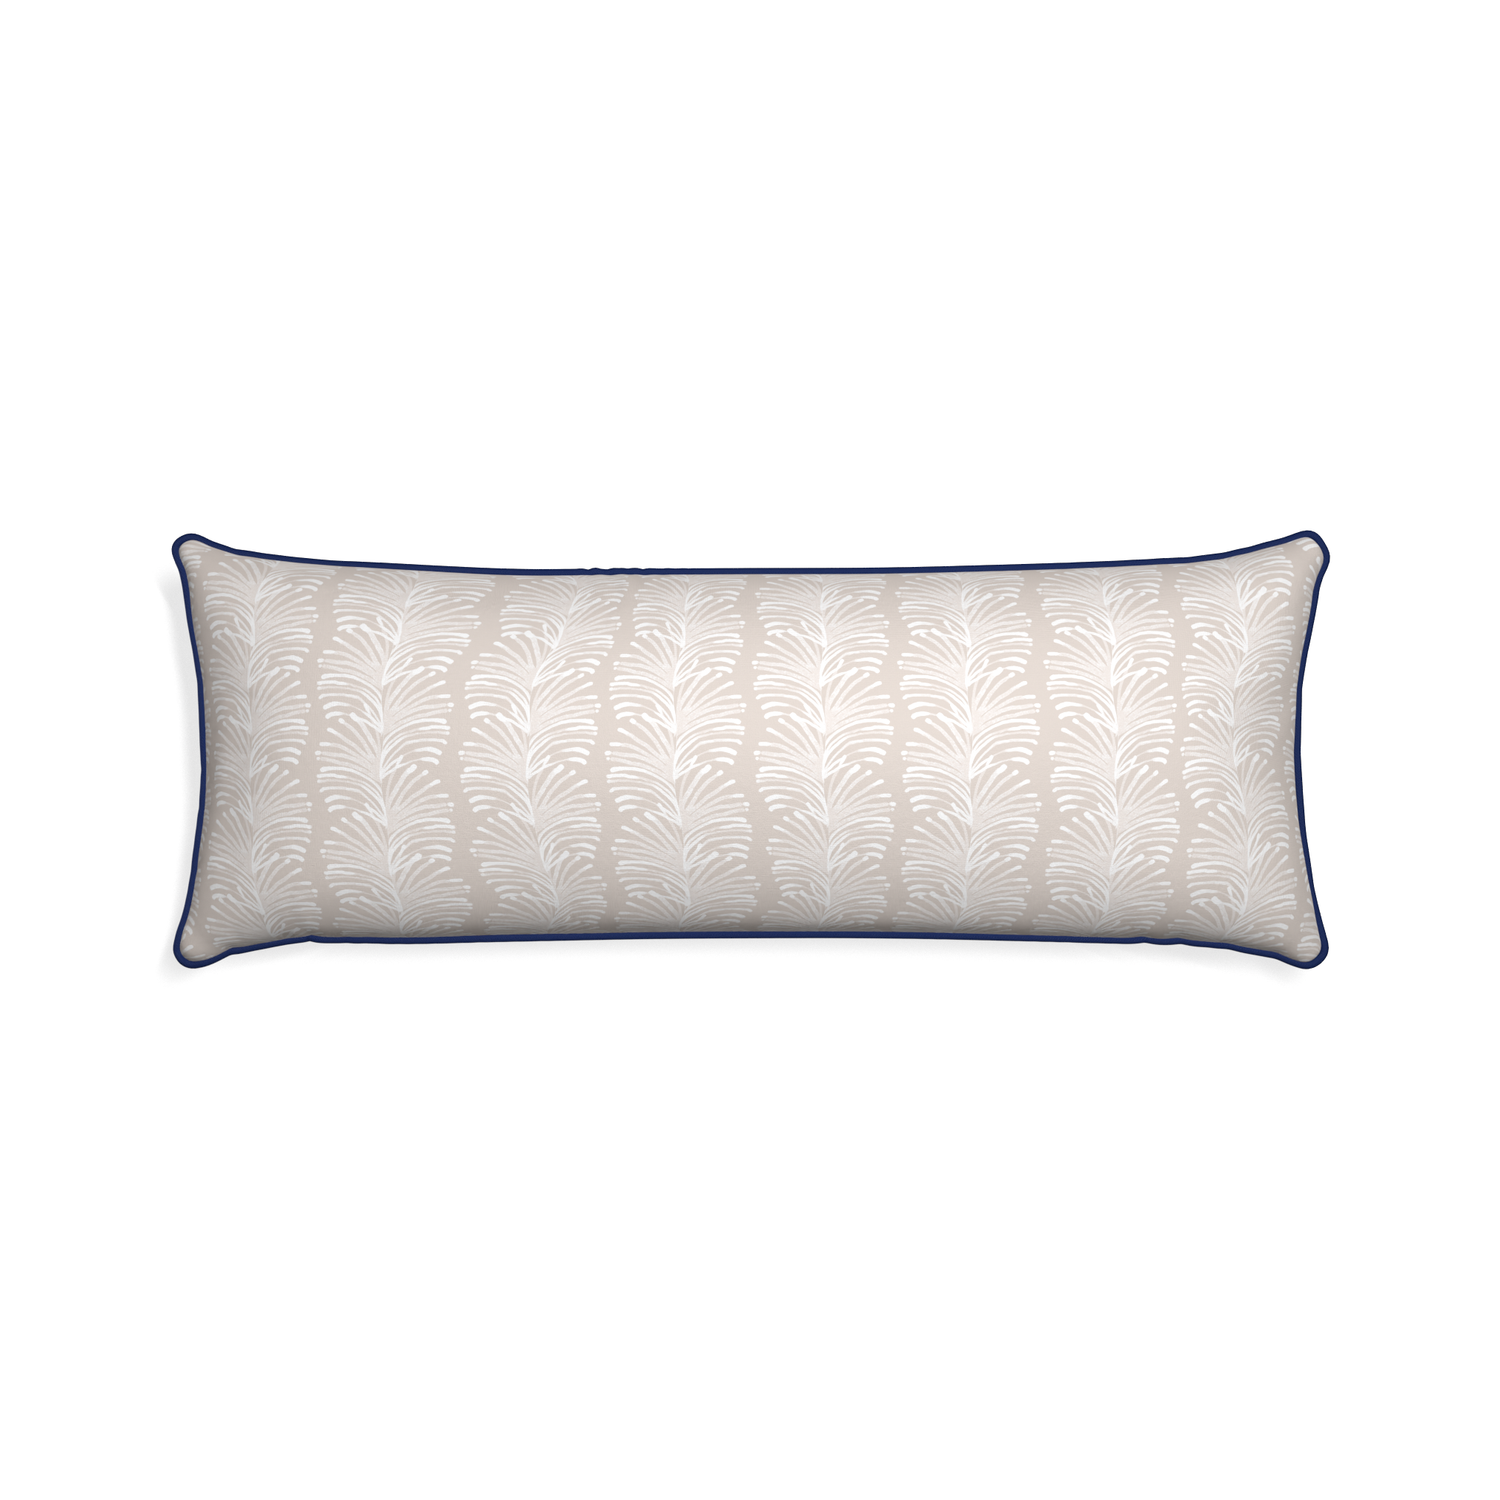 Xl-lumbar emma sand custom sand colored botanical stripepillow with midnight piping on white background